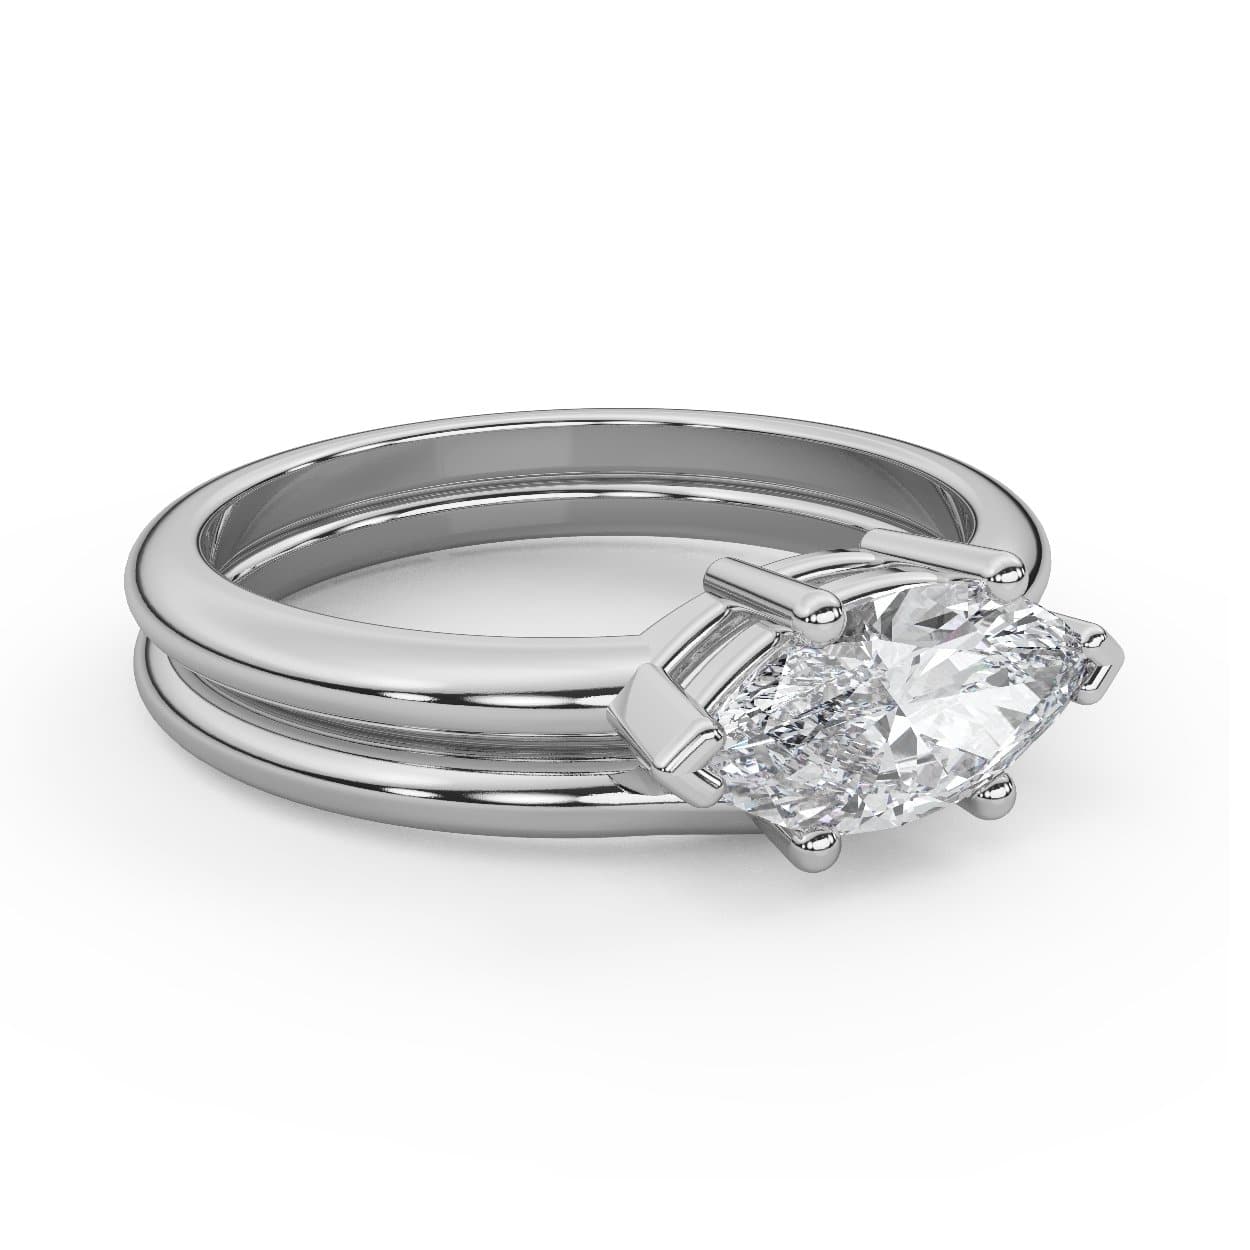 East West Marquise Cut Diamond Wedding Set in 14k Gold